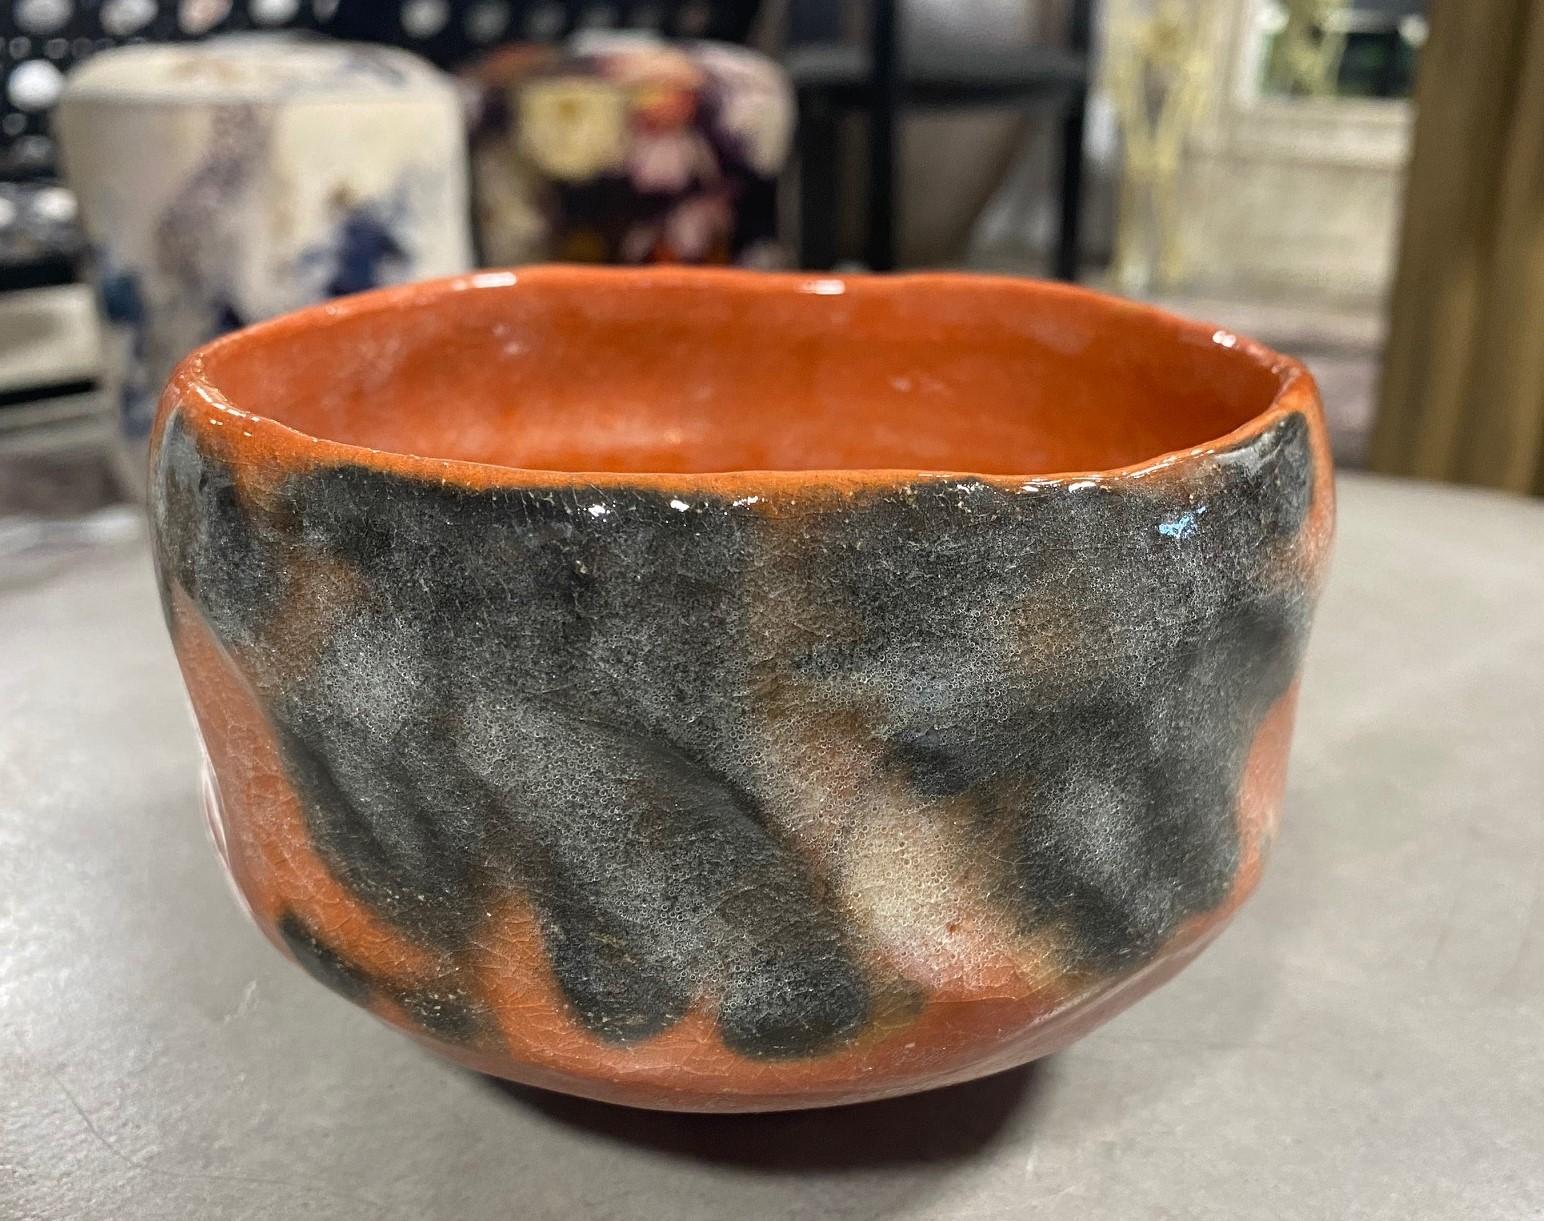 A wonderfully glazed, impeccably made Chawan tea bowl by famed Japanese master potter the 13th Kichizaemon Raku, Seinyu (1887-1944) who was the eldest son of Konyu - the 12th Kichizaemon of the Raku family line of potters - known as the most noted